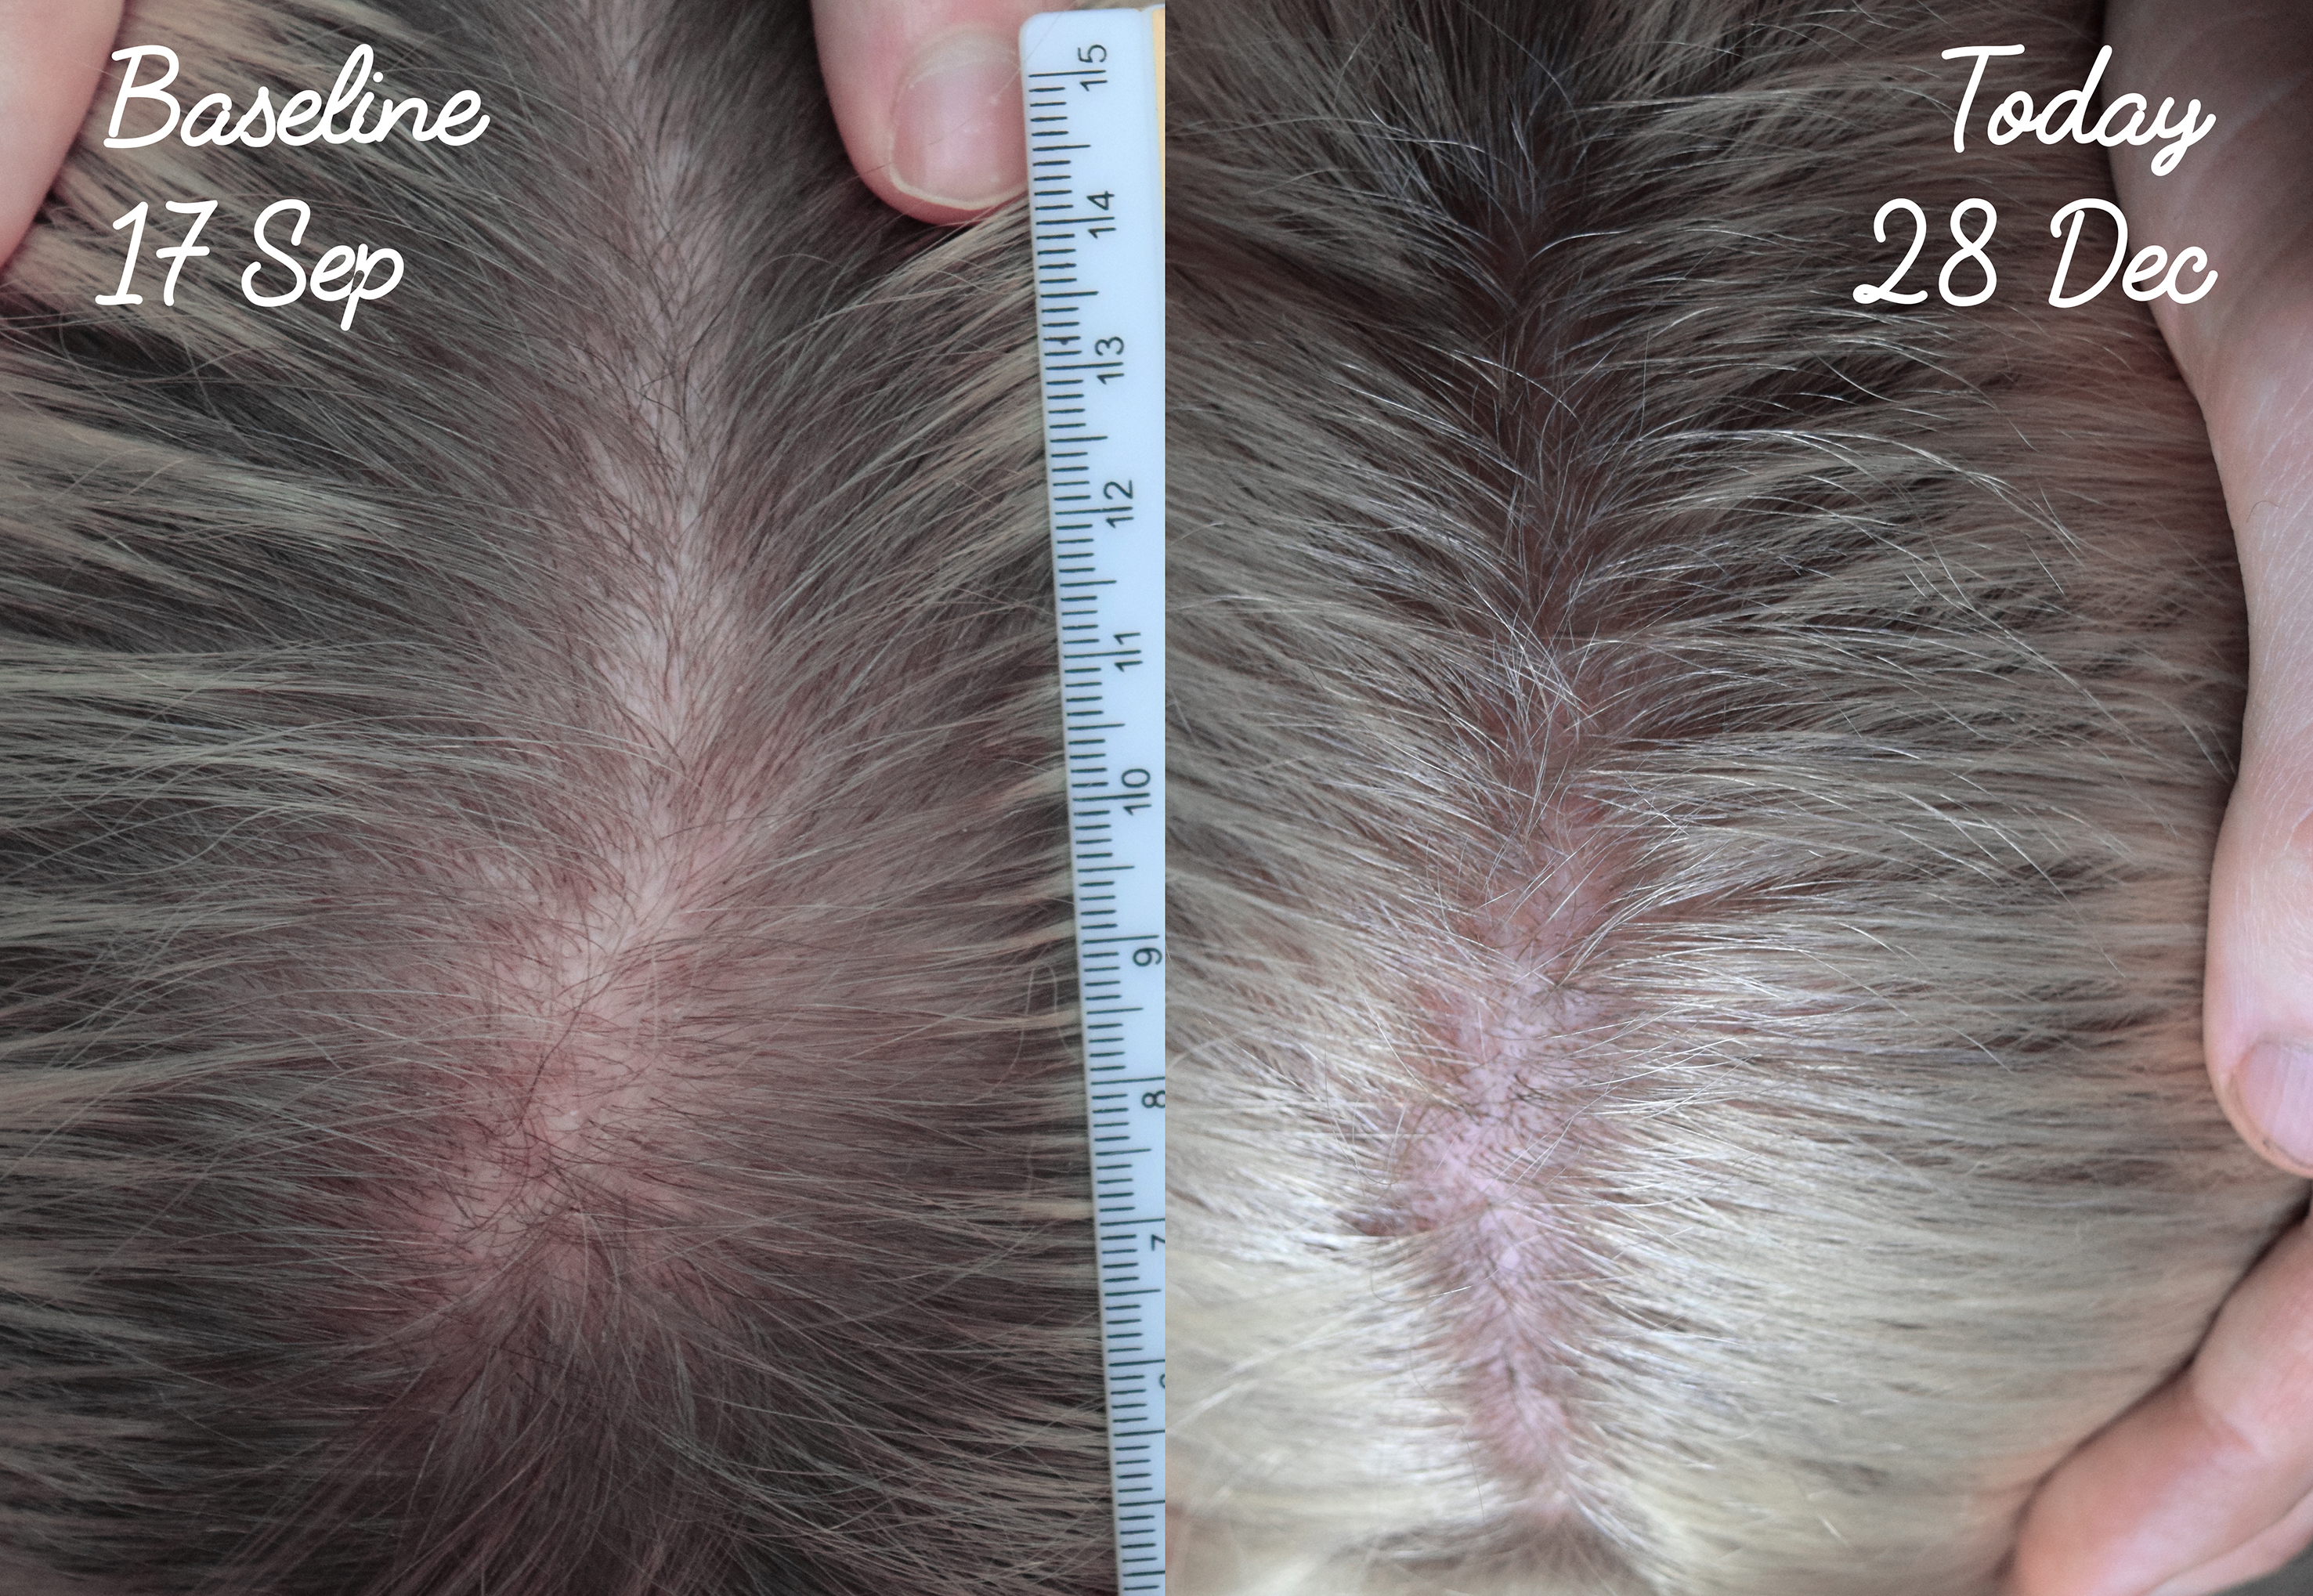 Why are there so many threads of experiencing regrowth with finasteride? |  HairLossTalk Forums